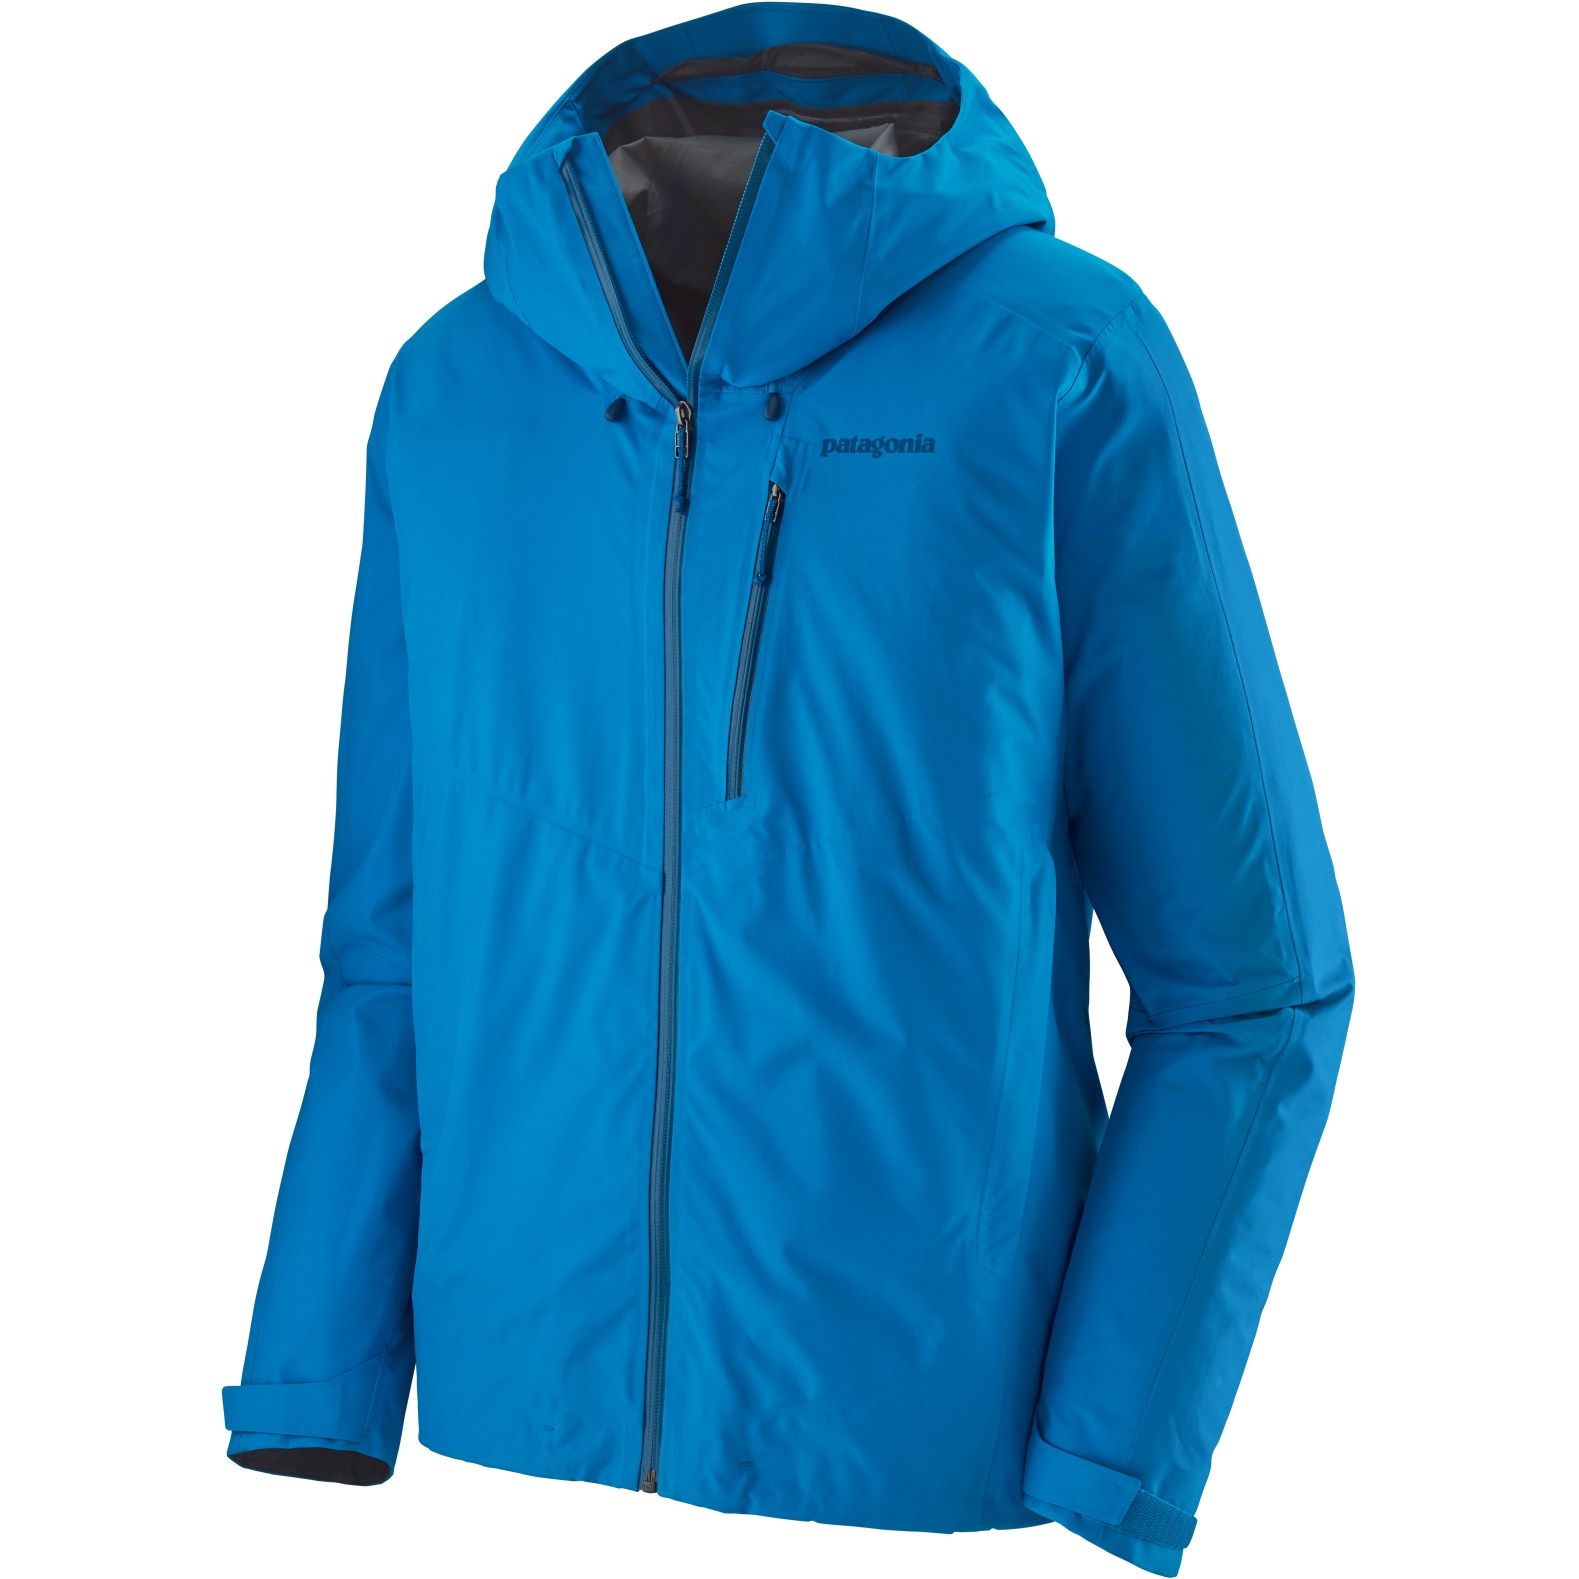 Patagonia M's Calcite Jacket - Andes Blue - Large